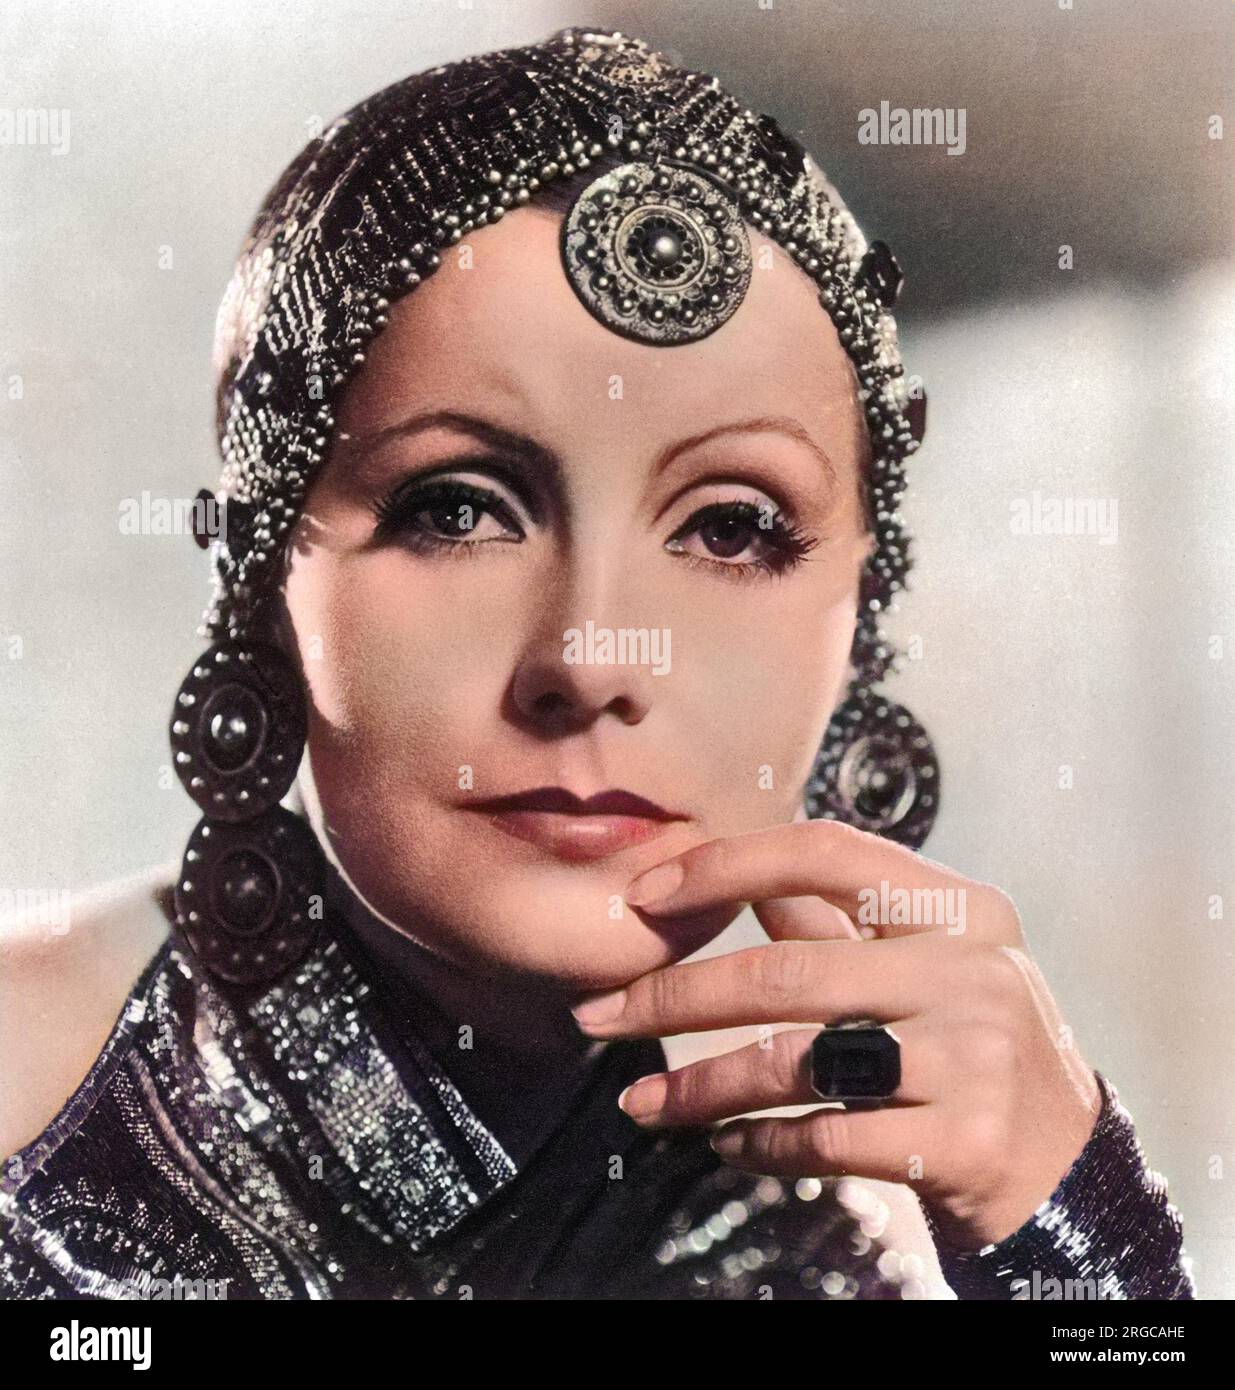 Greta Garbo  (1905 - 1990), as Mata Hari. Greta Garbo was born in Stockholm and was 'spotted' whilst studying at the Royal Theatre Dramatic School by the Swedish director Mauritz Stiller. Her first Hollywood film was 'The Temptress' 1926. Amongst her other successes are, 'Queen Christie' (1930), 'Anna Karenina' (1935) and 'Ninotchka' (1939). She retired from films in 1941, after receiving poor reviews for 'Two-Faced Woman.' She spent the rest of her life living as a recluse in New York. Stock Photo